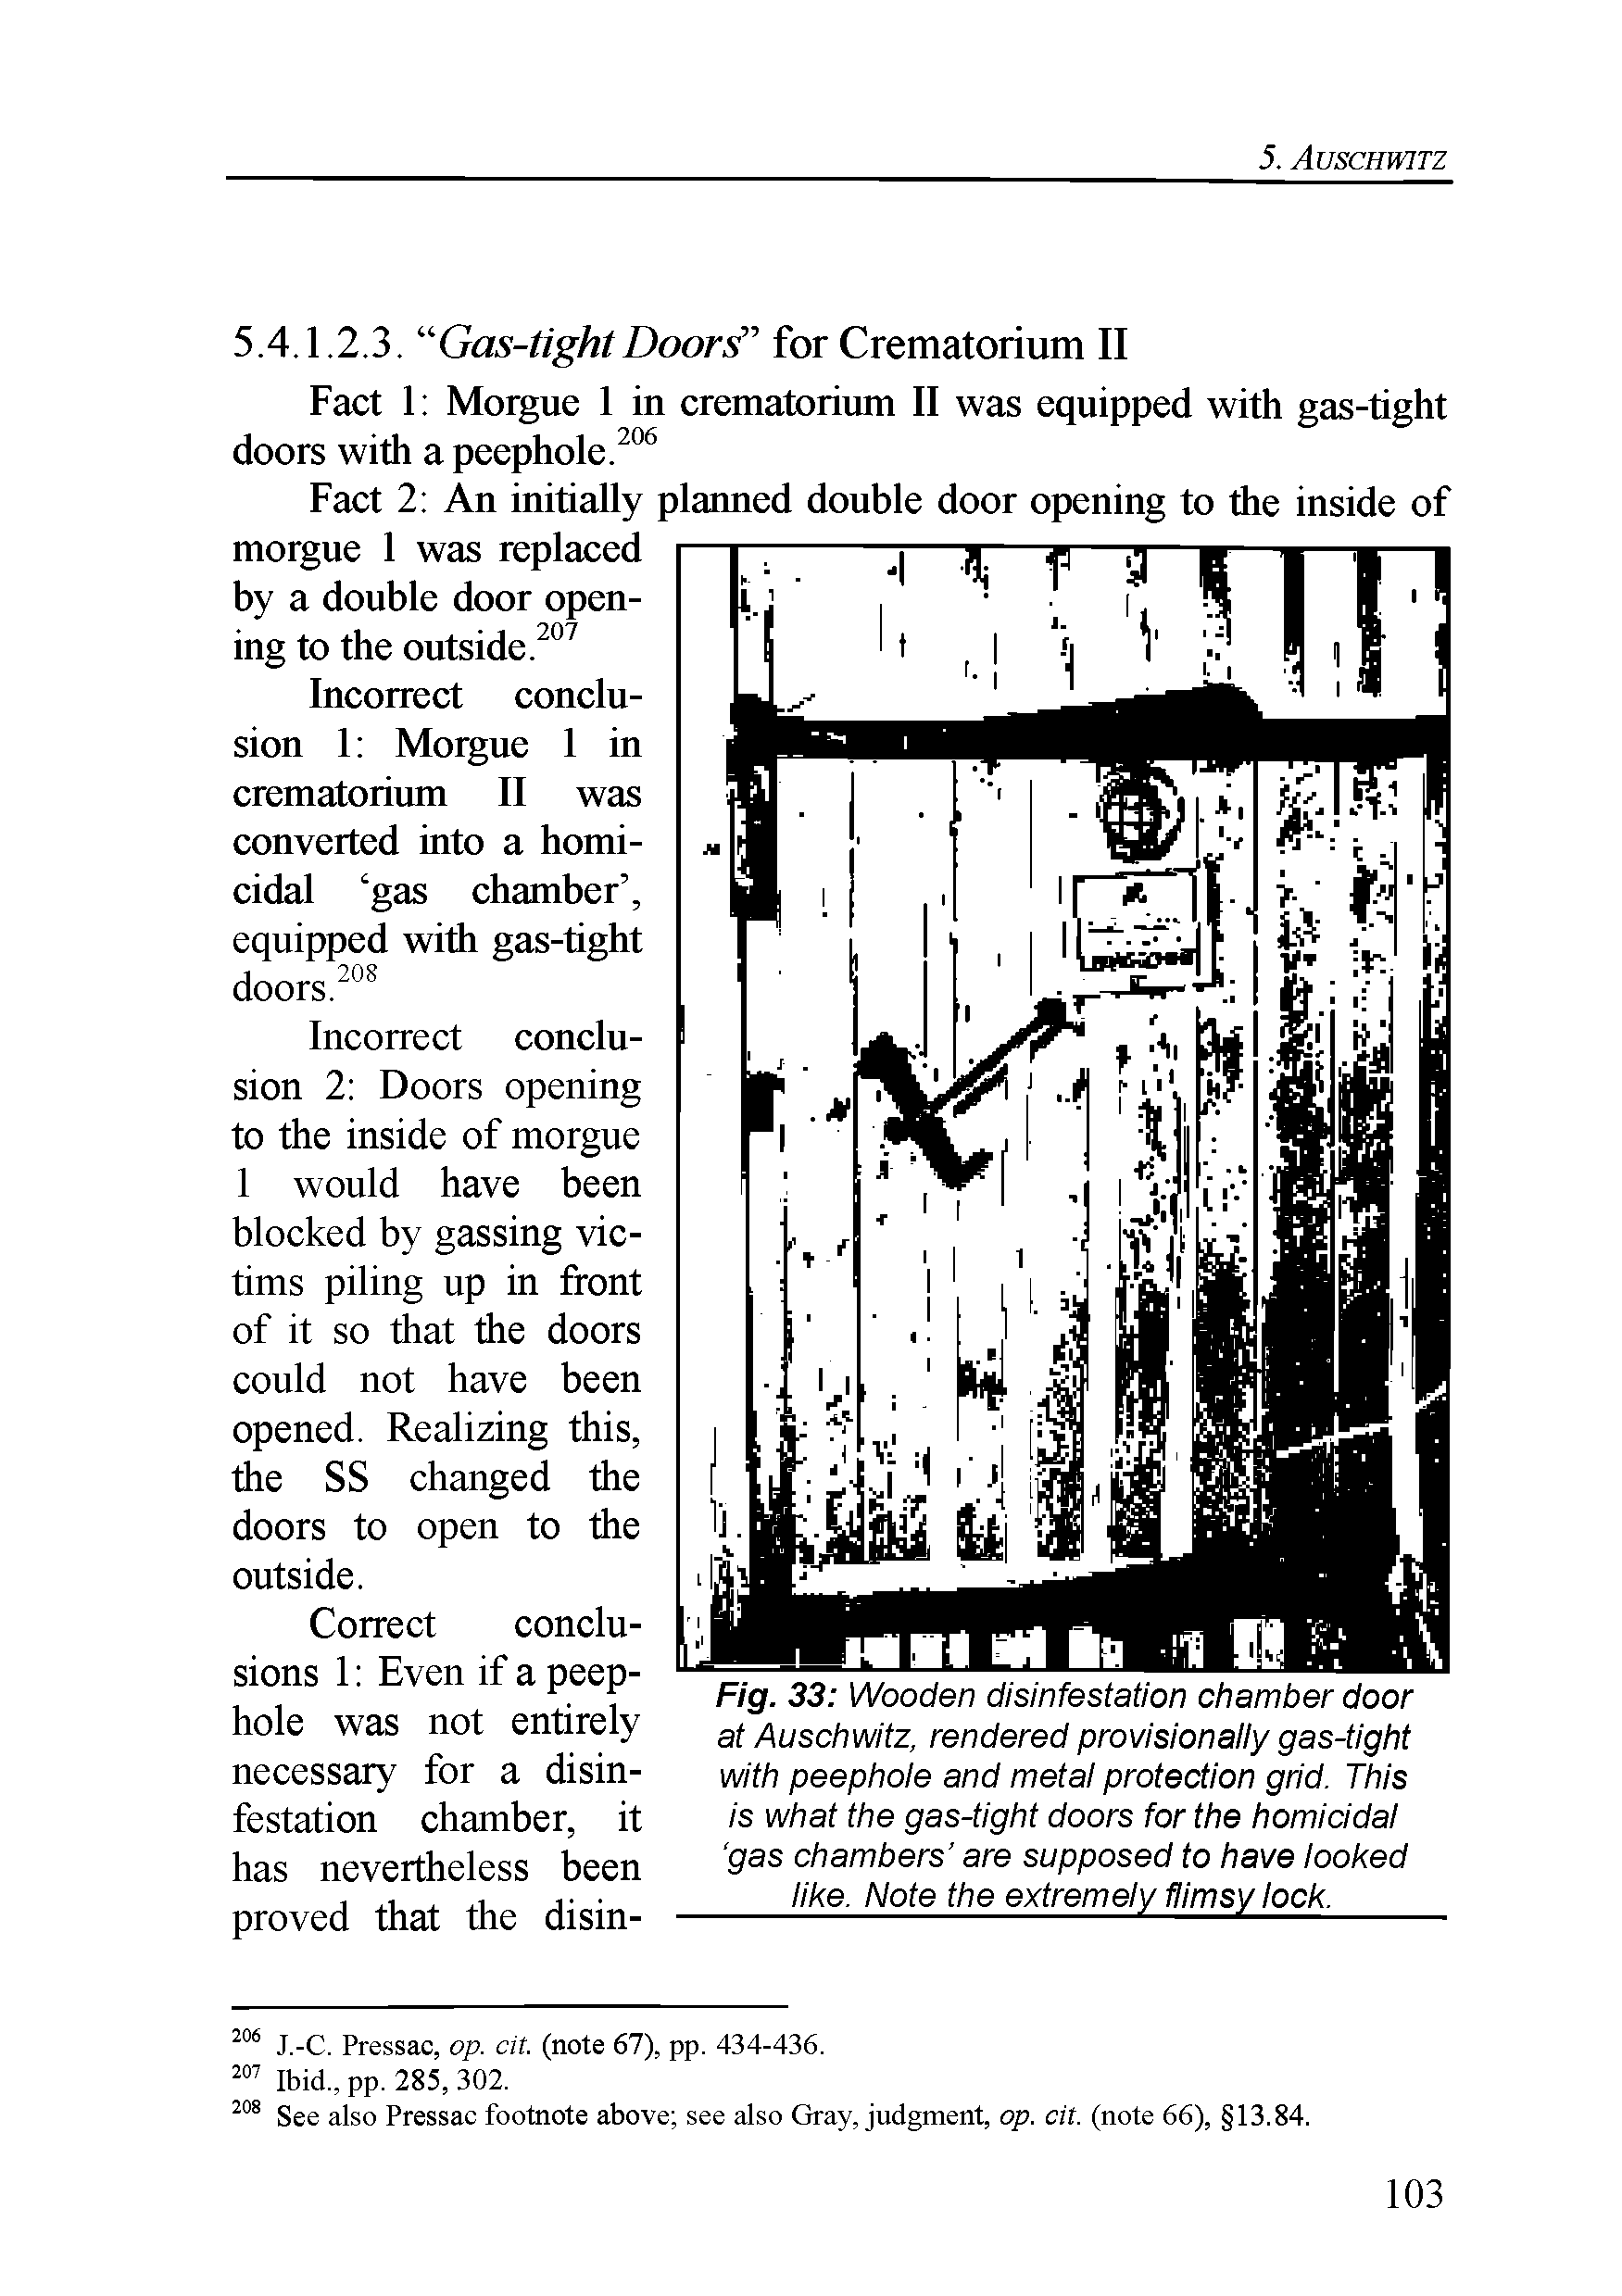 Fig. 33 Wooden disinfestation chamber door at Auschwitz, rendered provisionally gas-tight with peephole and metal protection grid. This is what the gas-tight doors for the homicidal gas chambers are supposed to have looked like. Note the extremely flimsy lock. ...